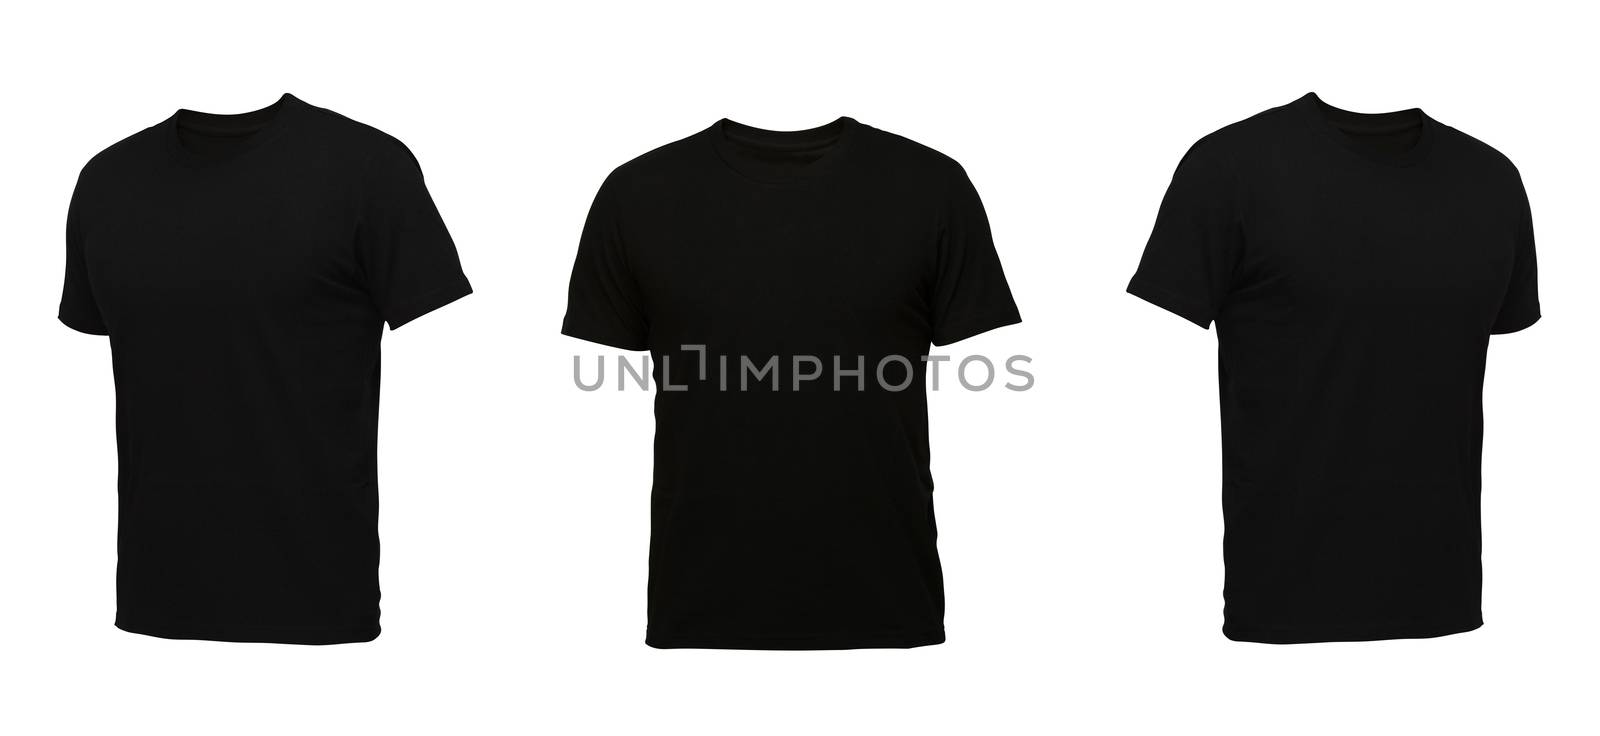 Black sleeveless T-shirt. t-shirt front view three positions on a white background